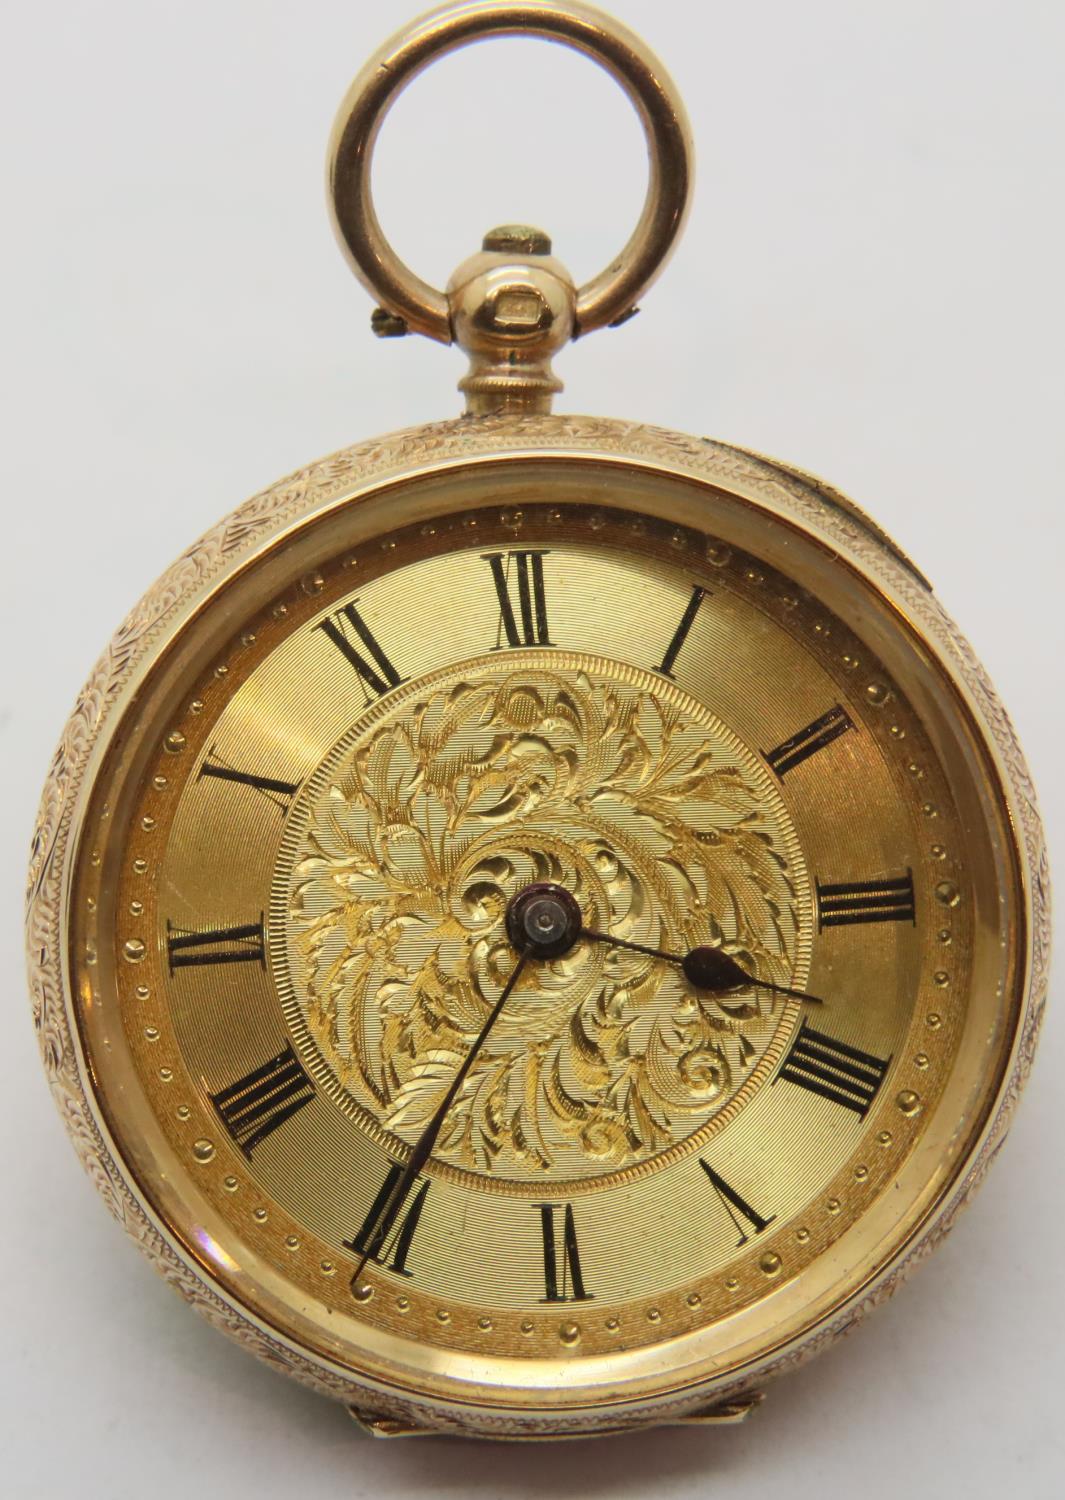 14ct gold fob watch with gold face. P&P Group 1 (£14+VAT for the first lot and £1+VAT for subsequent